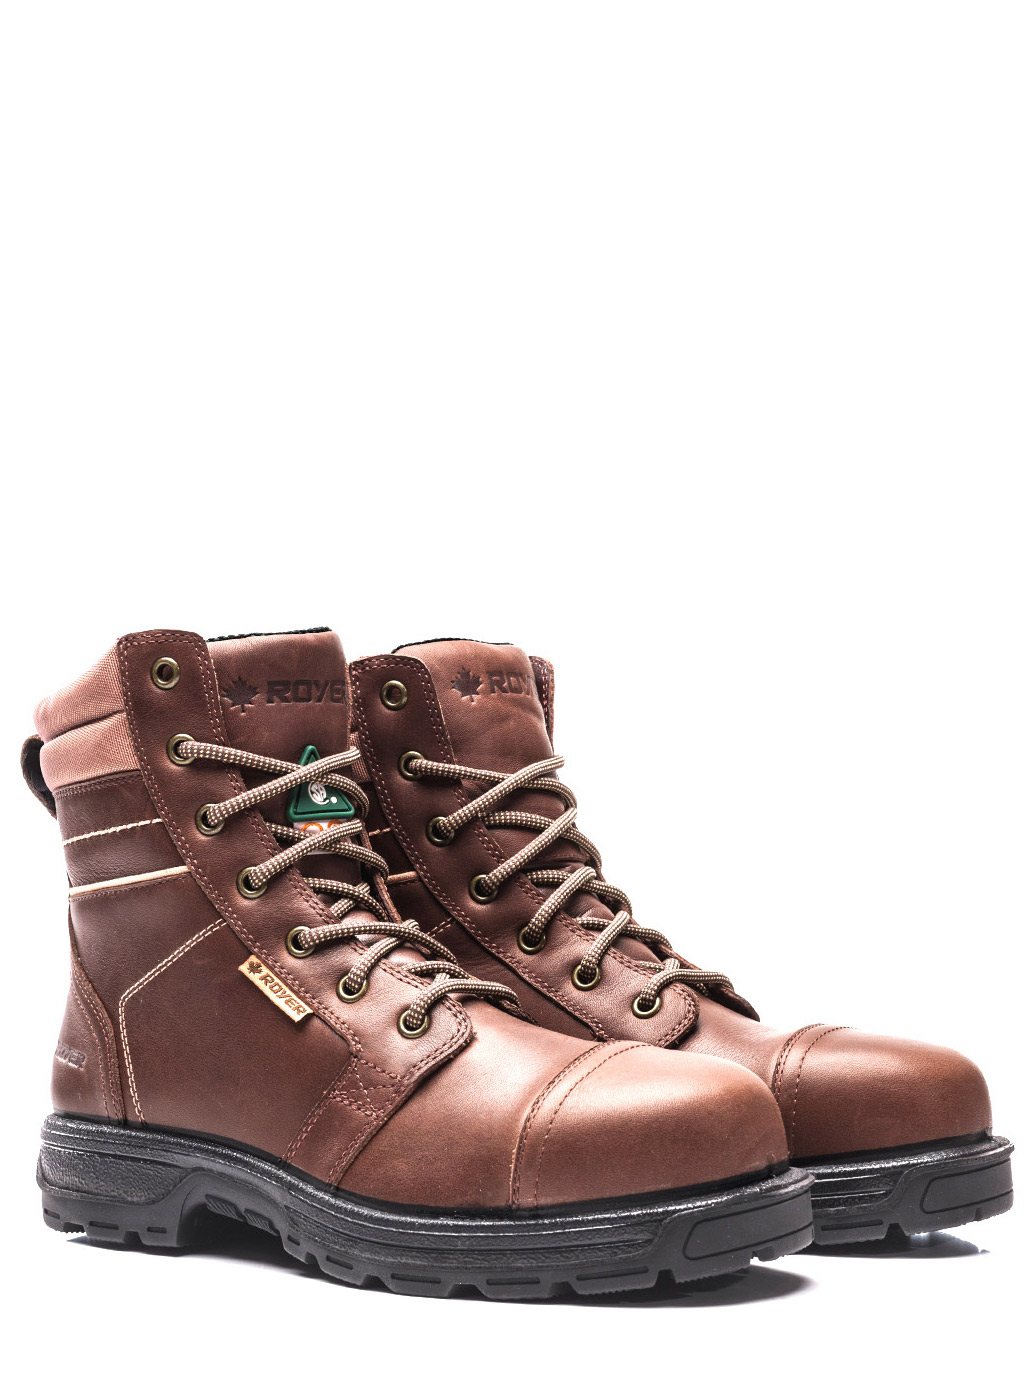 metal free work boots canada